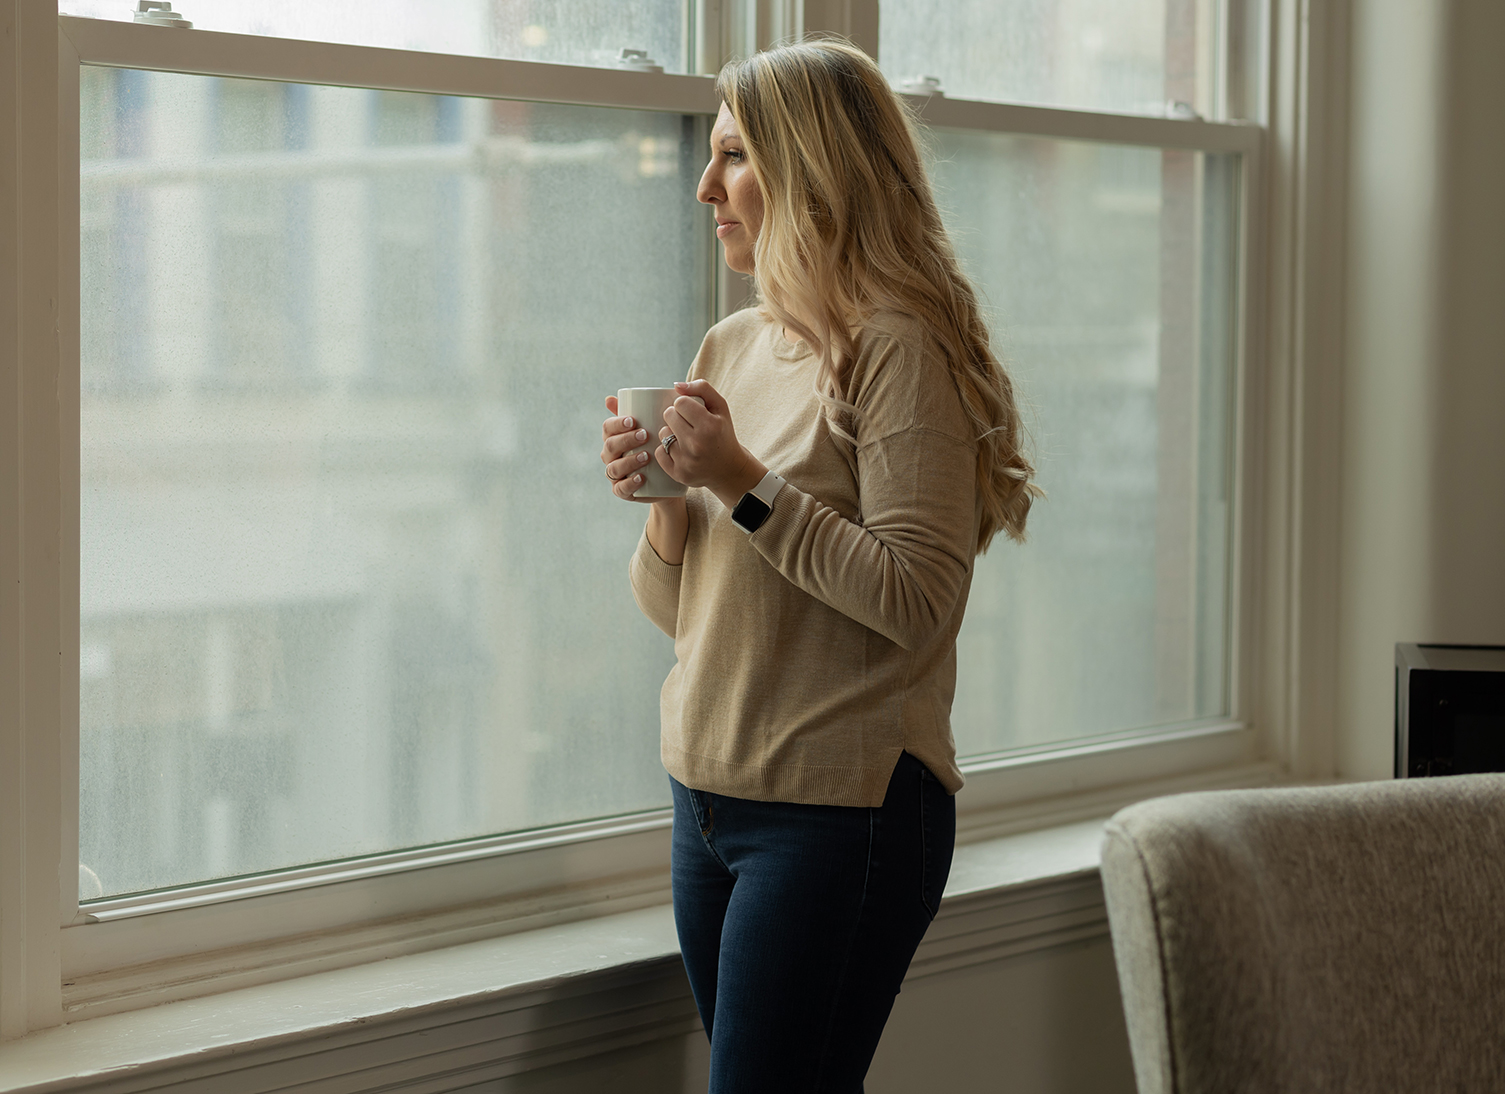 Dr. Desirae Allen, DBT therapist, holds a coffee cup and looks out the window, thinking about how DBT can be helpful for depression